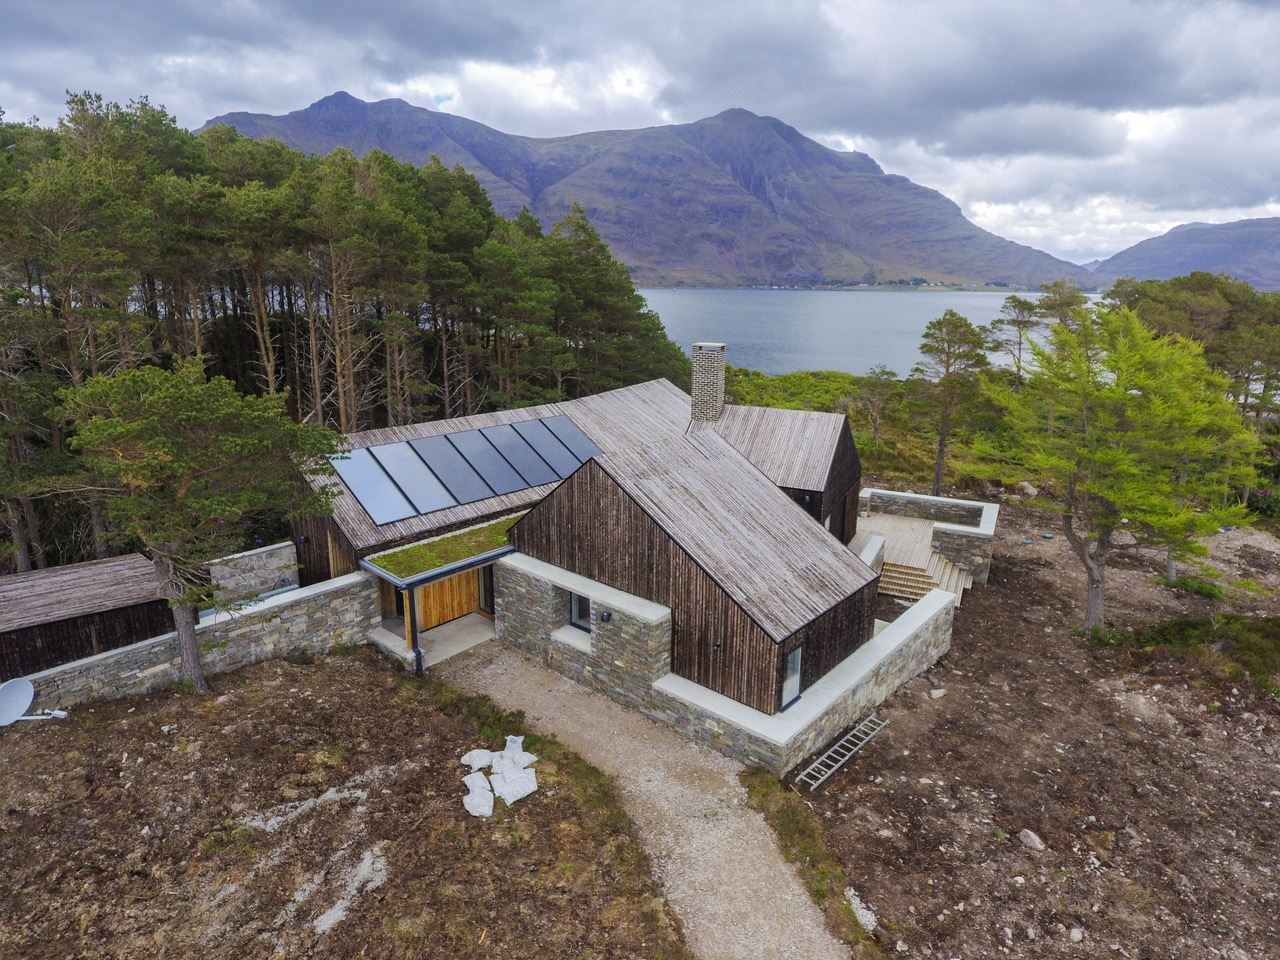 AES Solar installed the solar panels and off-grid power system for Lochside House in the north-west Highlands, which won TV's Grand Designs in 2018.